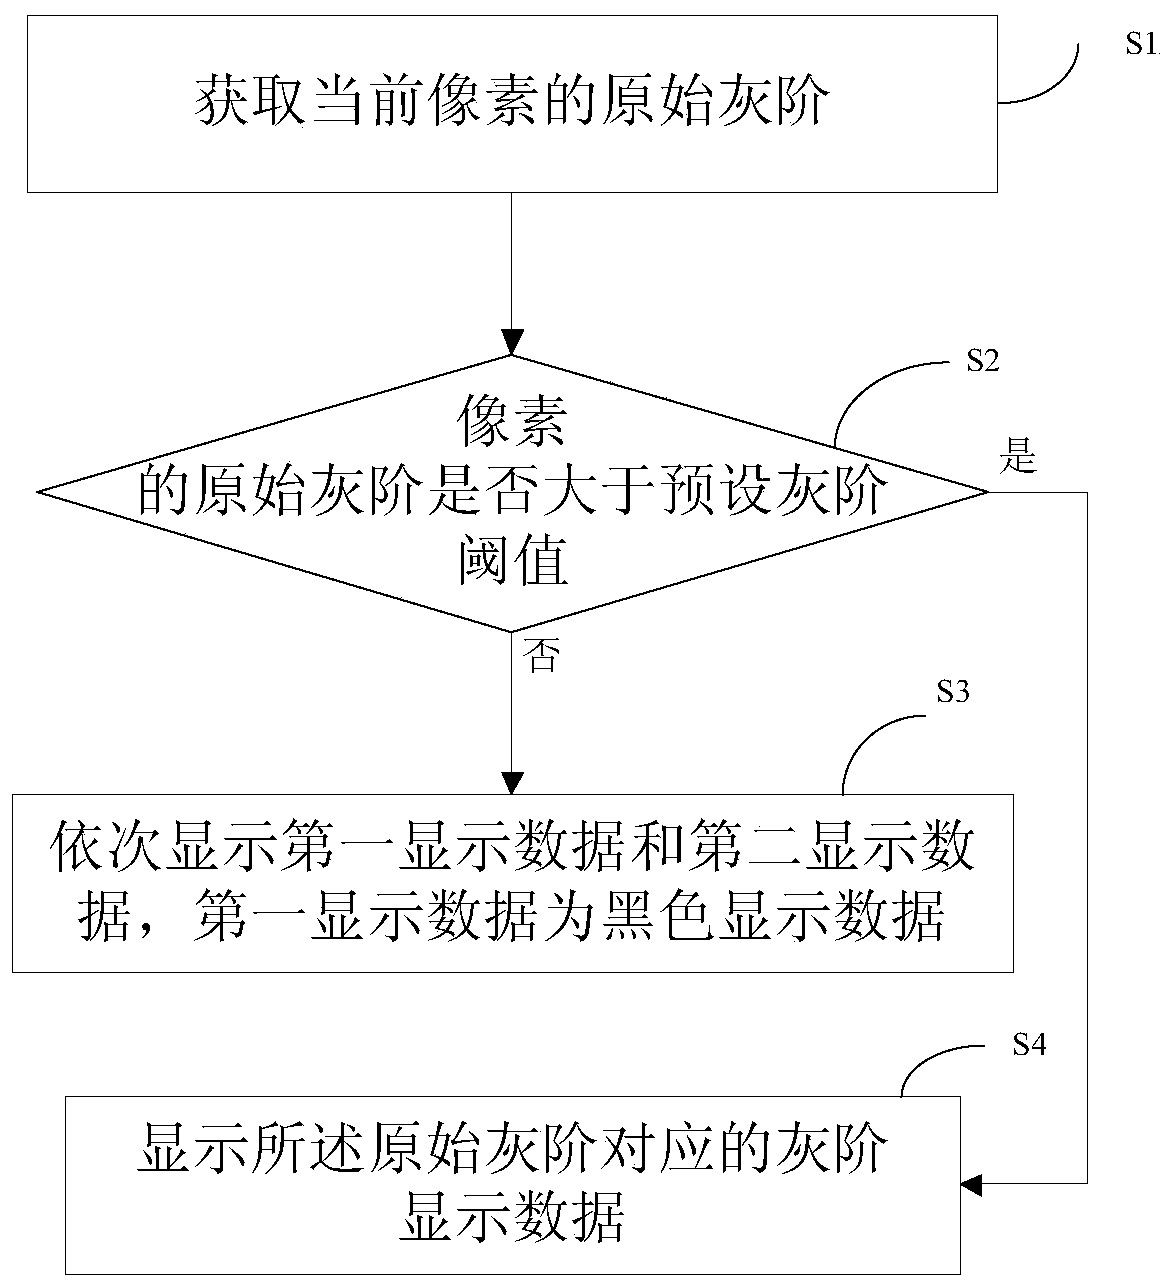 A display method and device